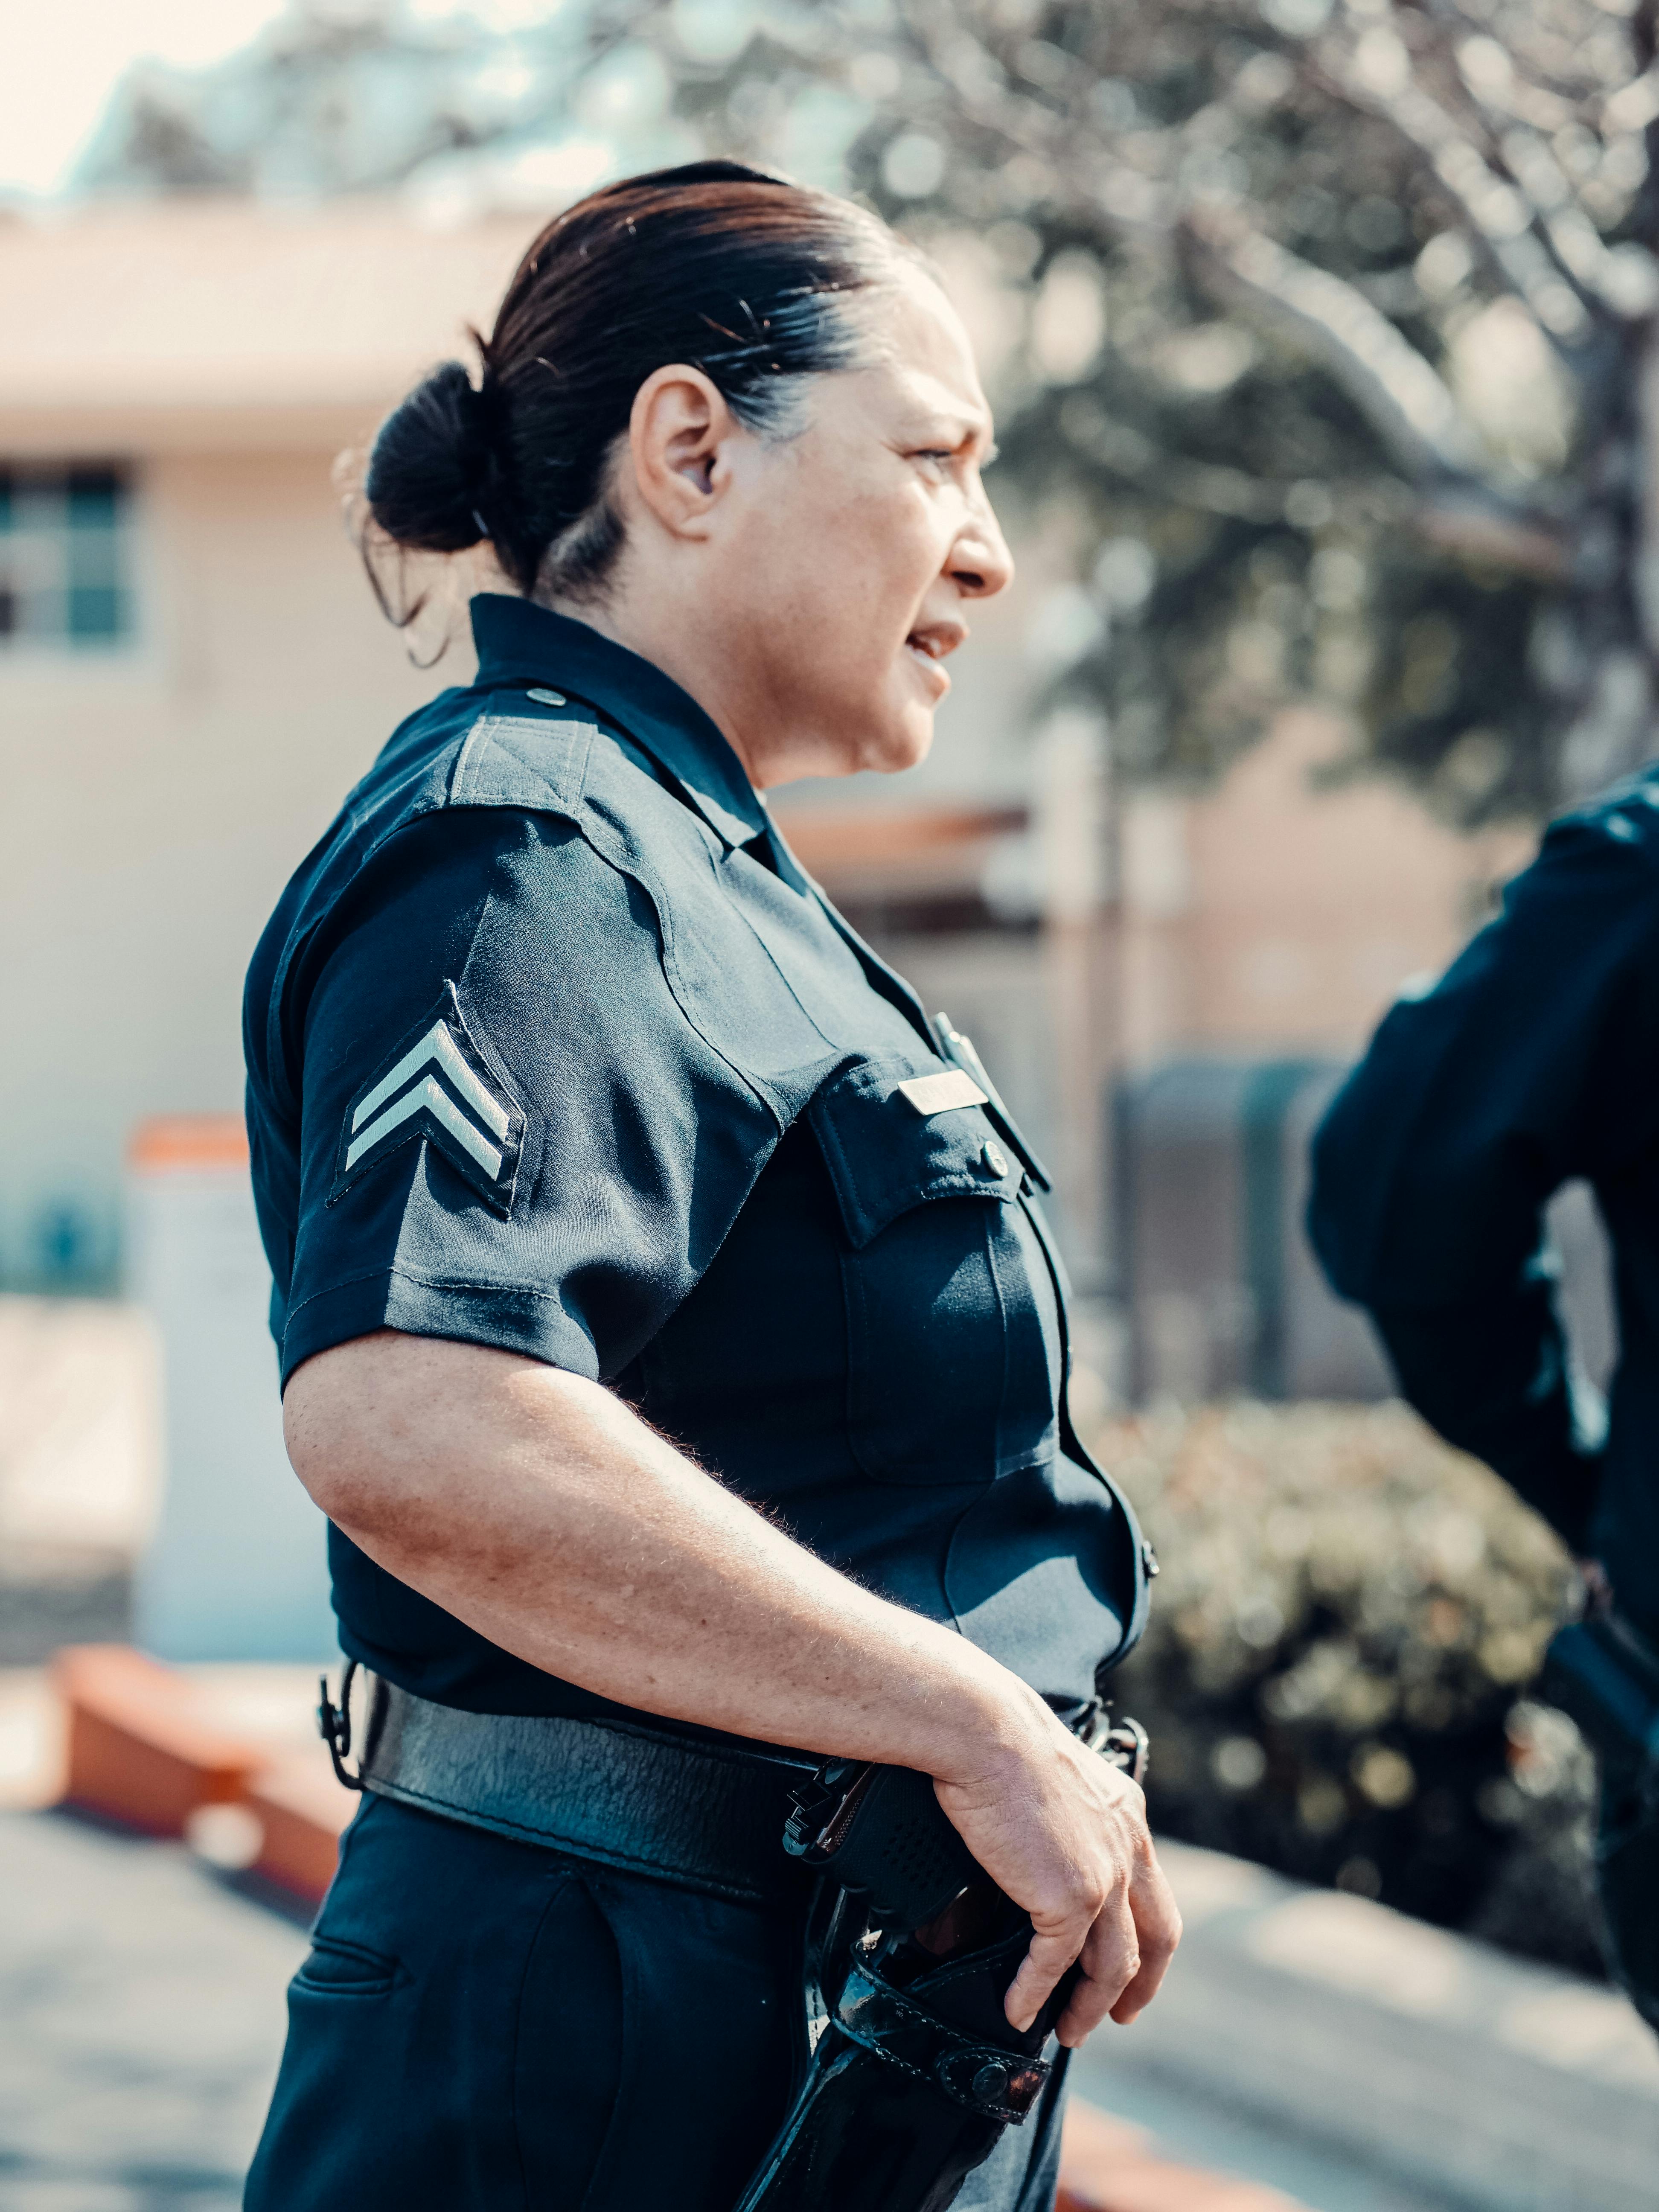 A female police officer talking to someone outside the frame | Source: Pexels